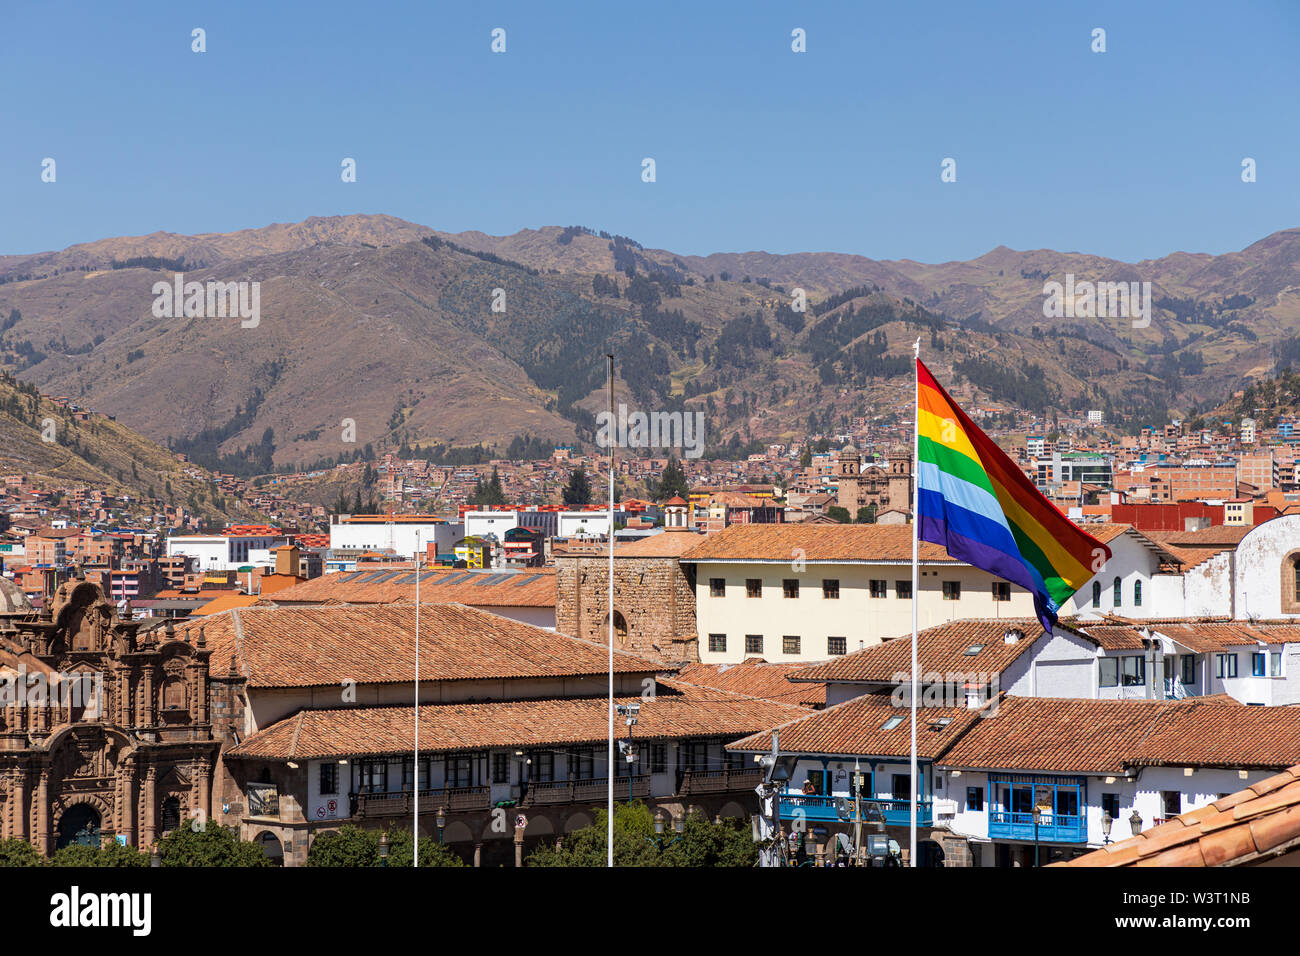 Cusco flag flying over the rooftops in the Plaza de Armas, Cusco, Peru, South America Stock Photo